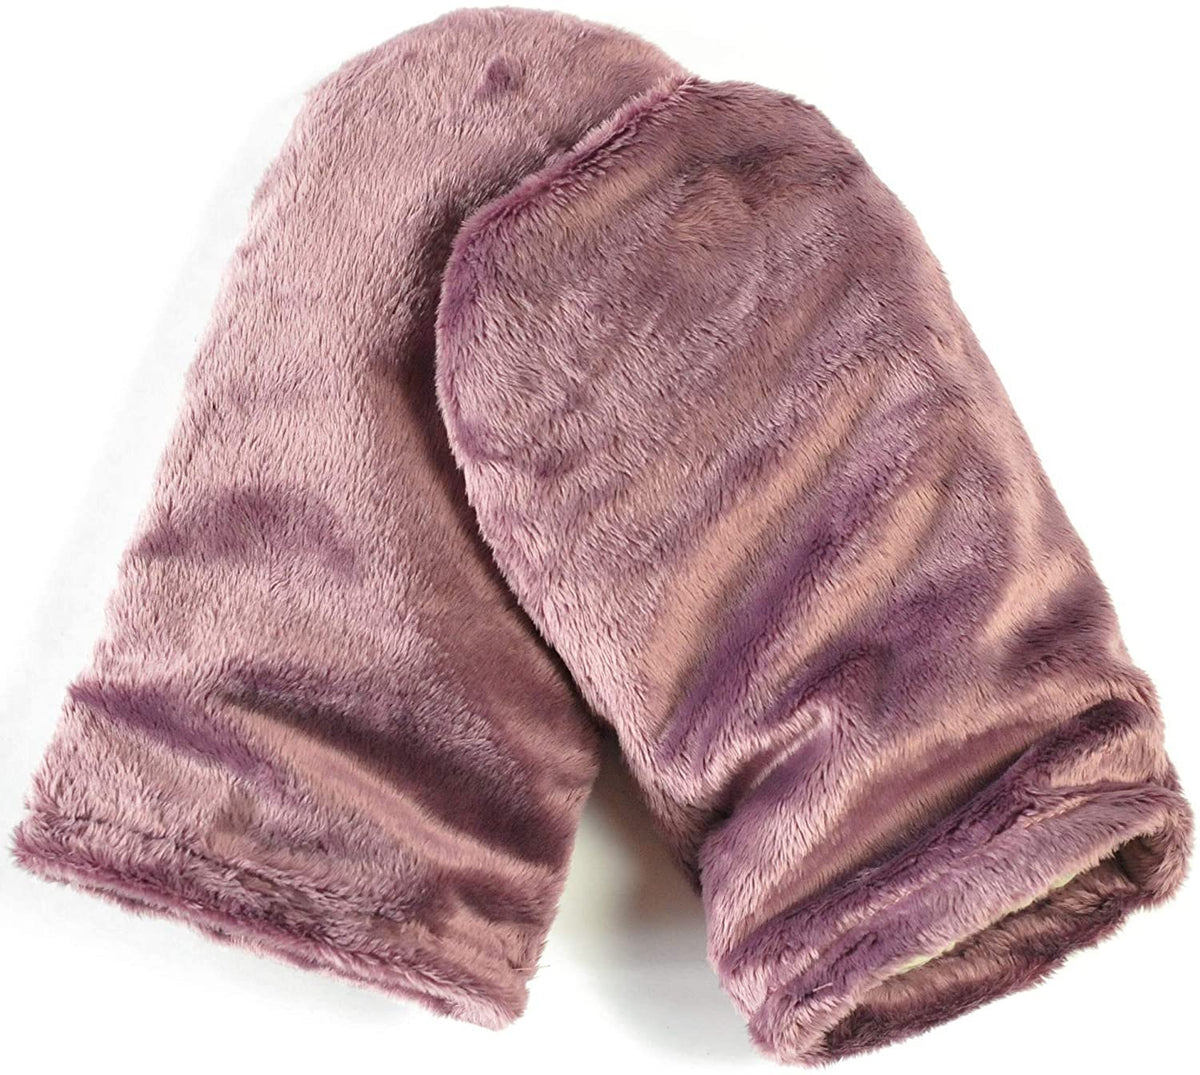 Heated Microwavable Mitts - Herbal Hot/Cold Deep Penetrating Herbal Aromatherapy Therapy Mittens with Flaxseed and Herbs - Trigger Finger, Inflammation, Carpal Tunnel